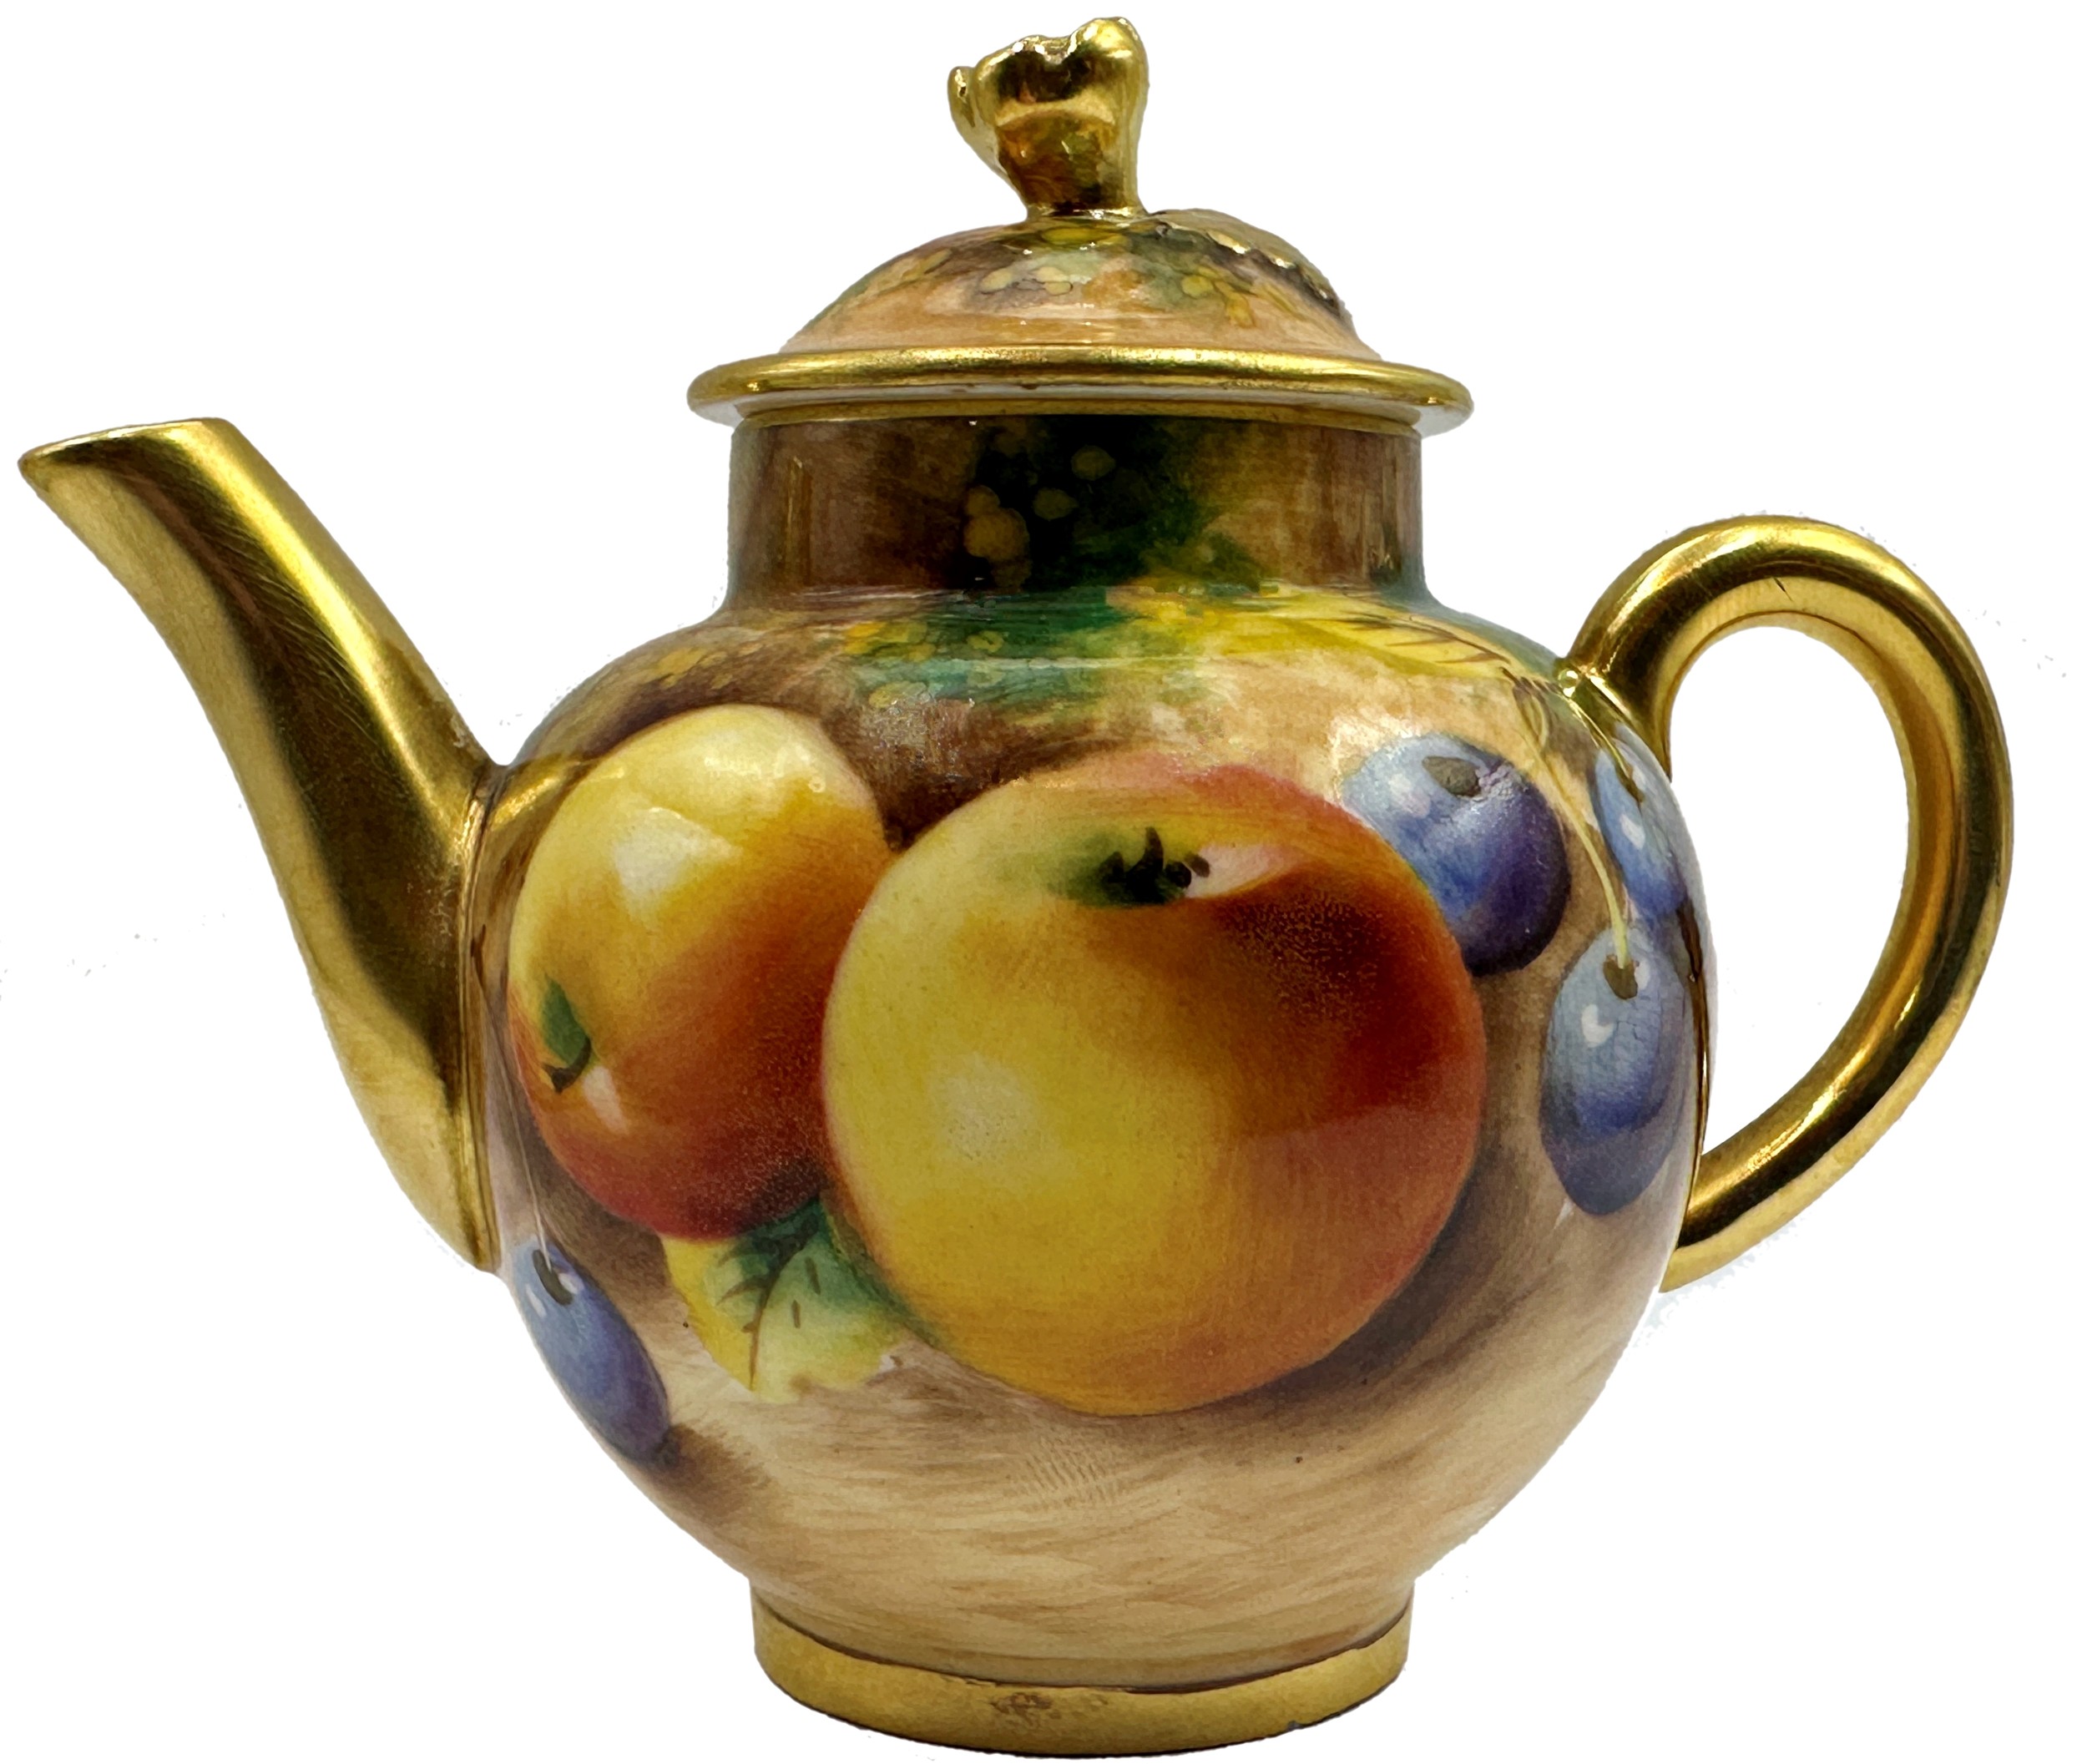 Royal Worcester hand painted miniature teapot by Frank Roberts, fruits in a grotto setting, gilt